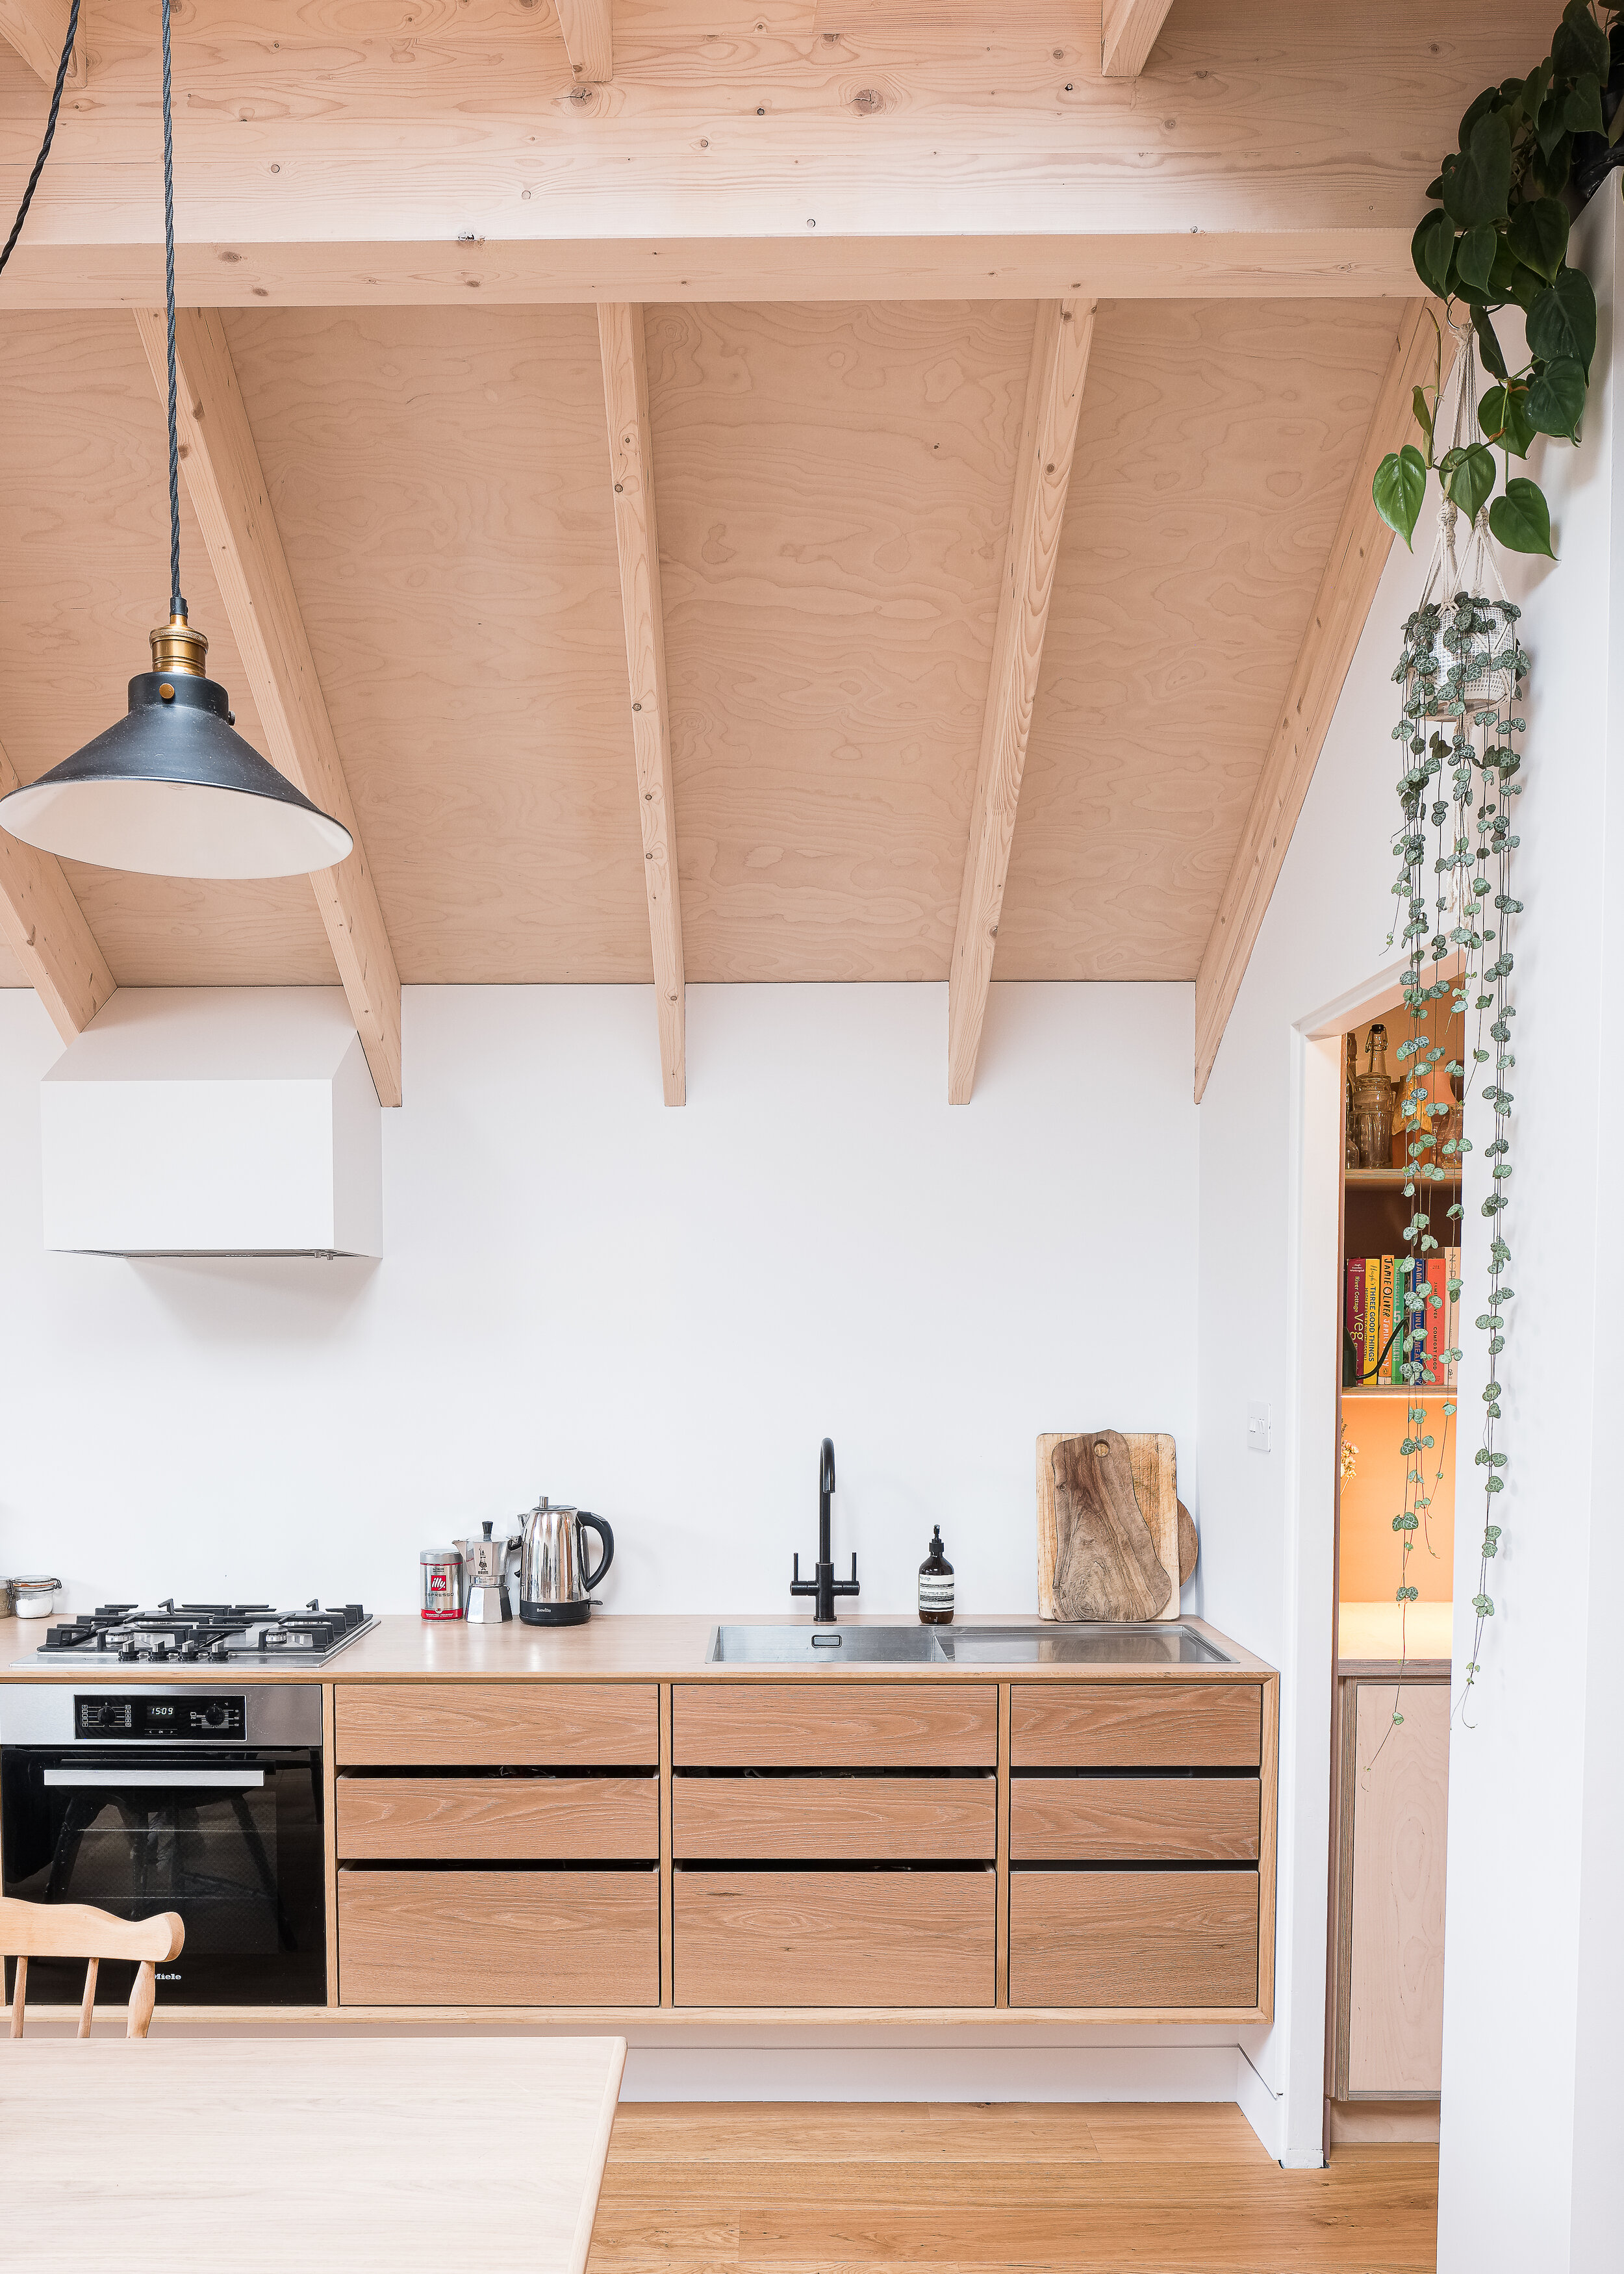 Fred+Howarth+Photography_Cabinet+Makers+House_04.jpg